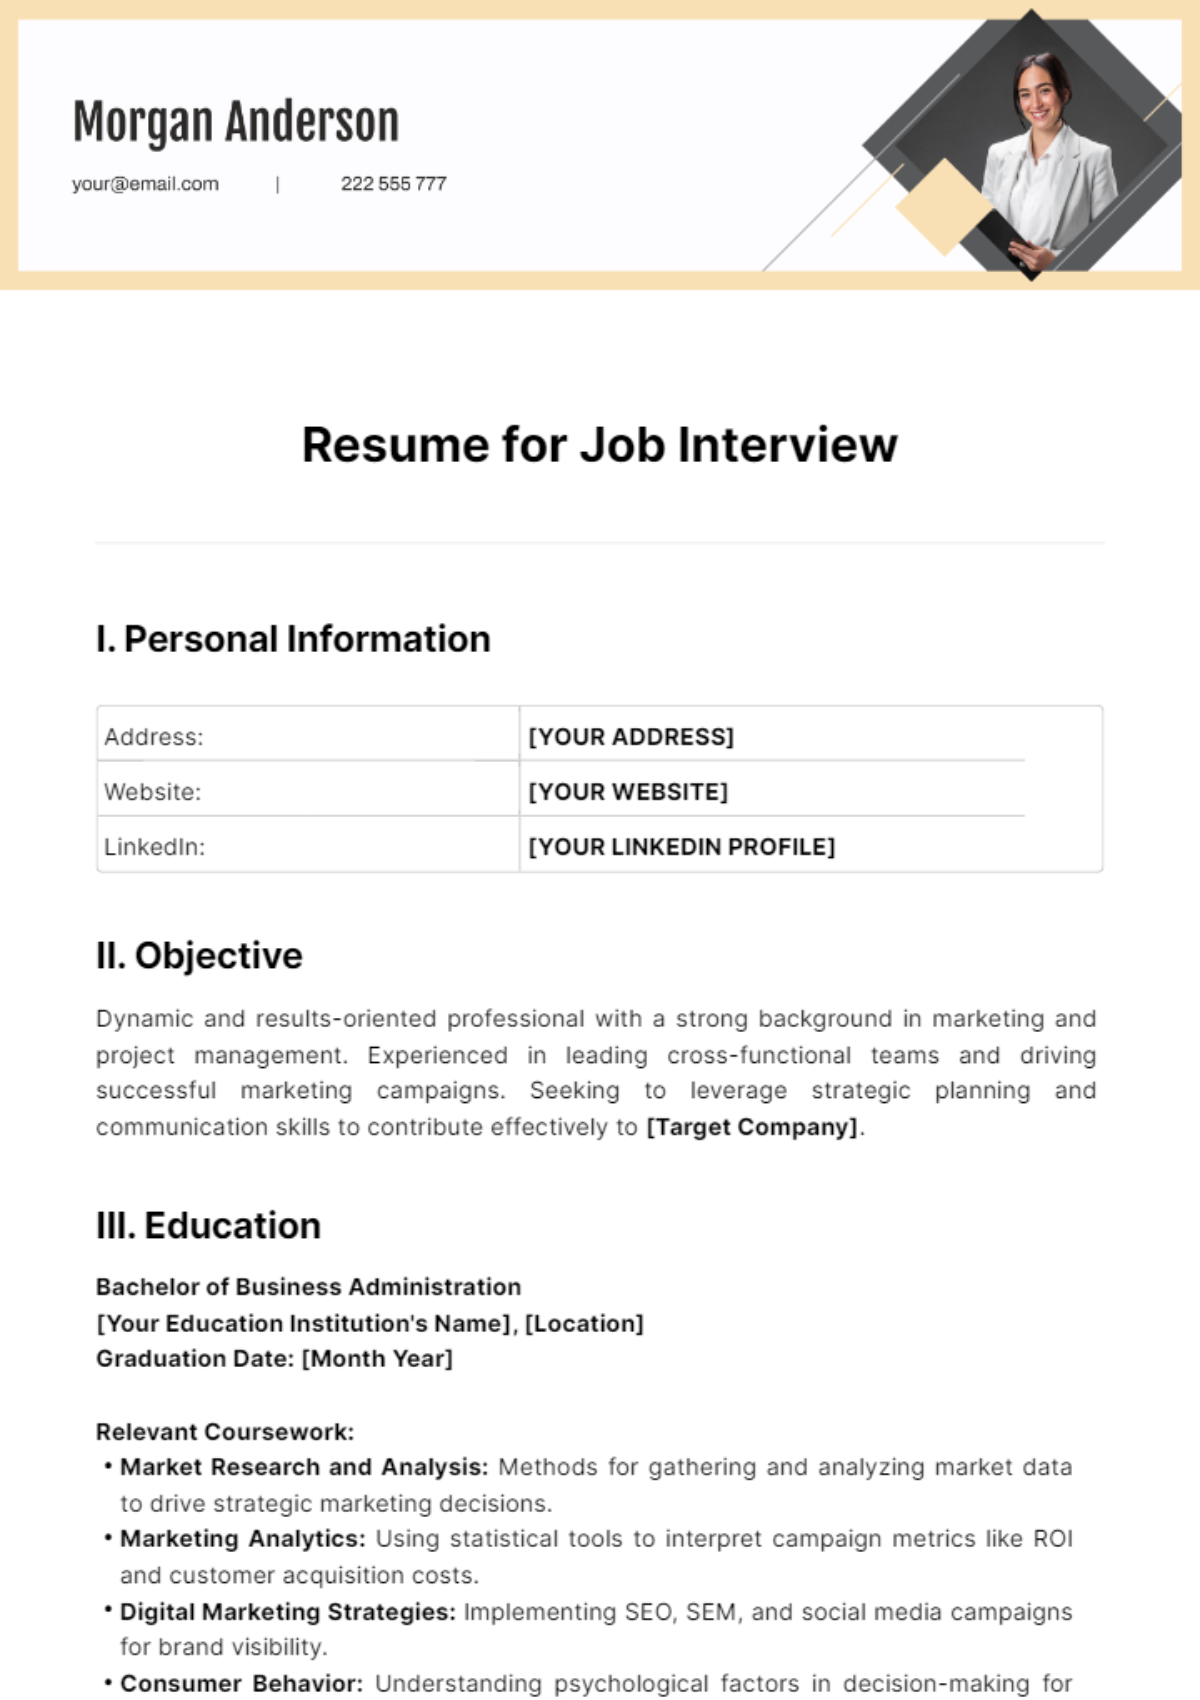 Resume for Job Interview Template